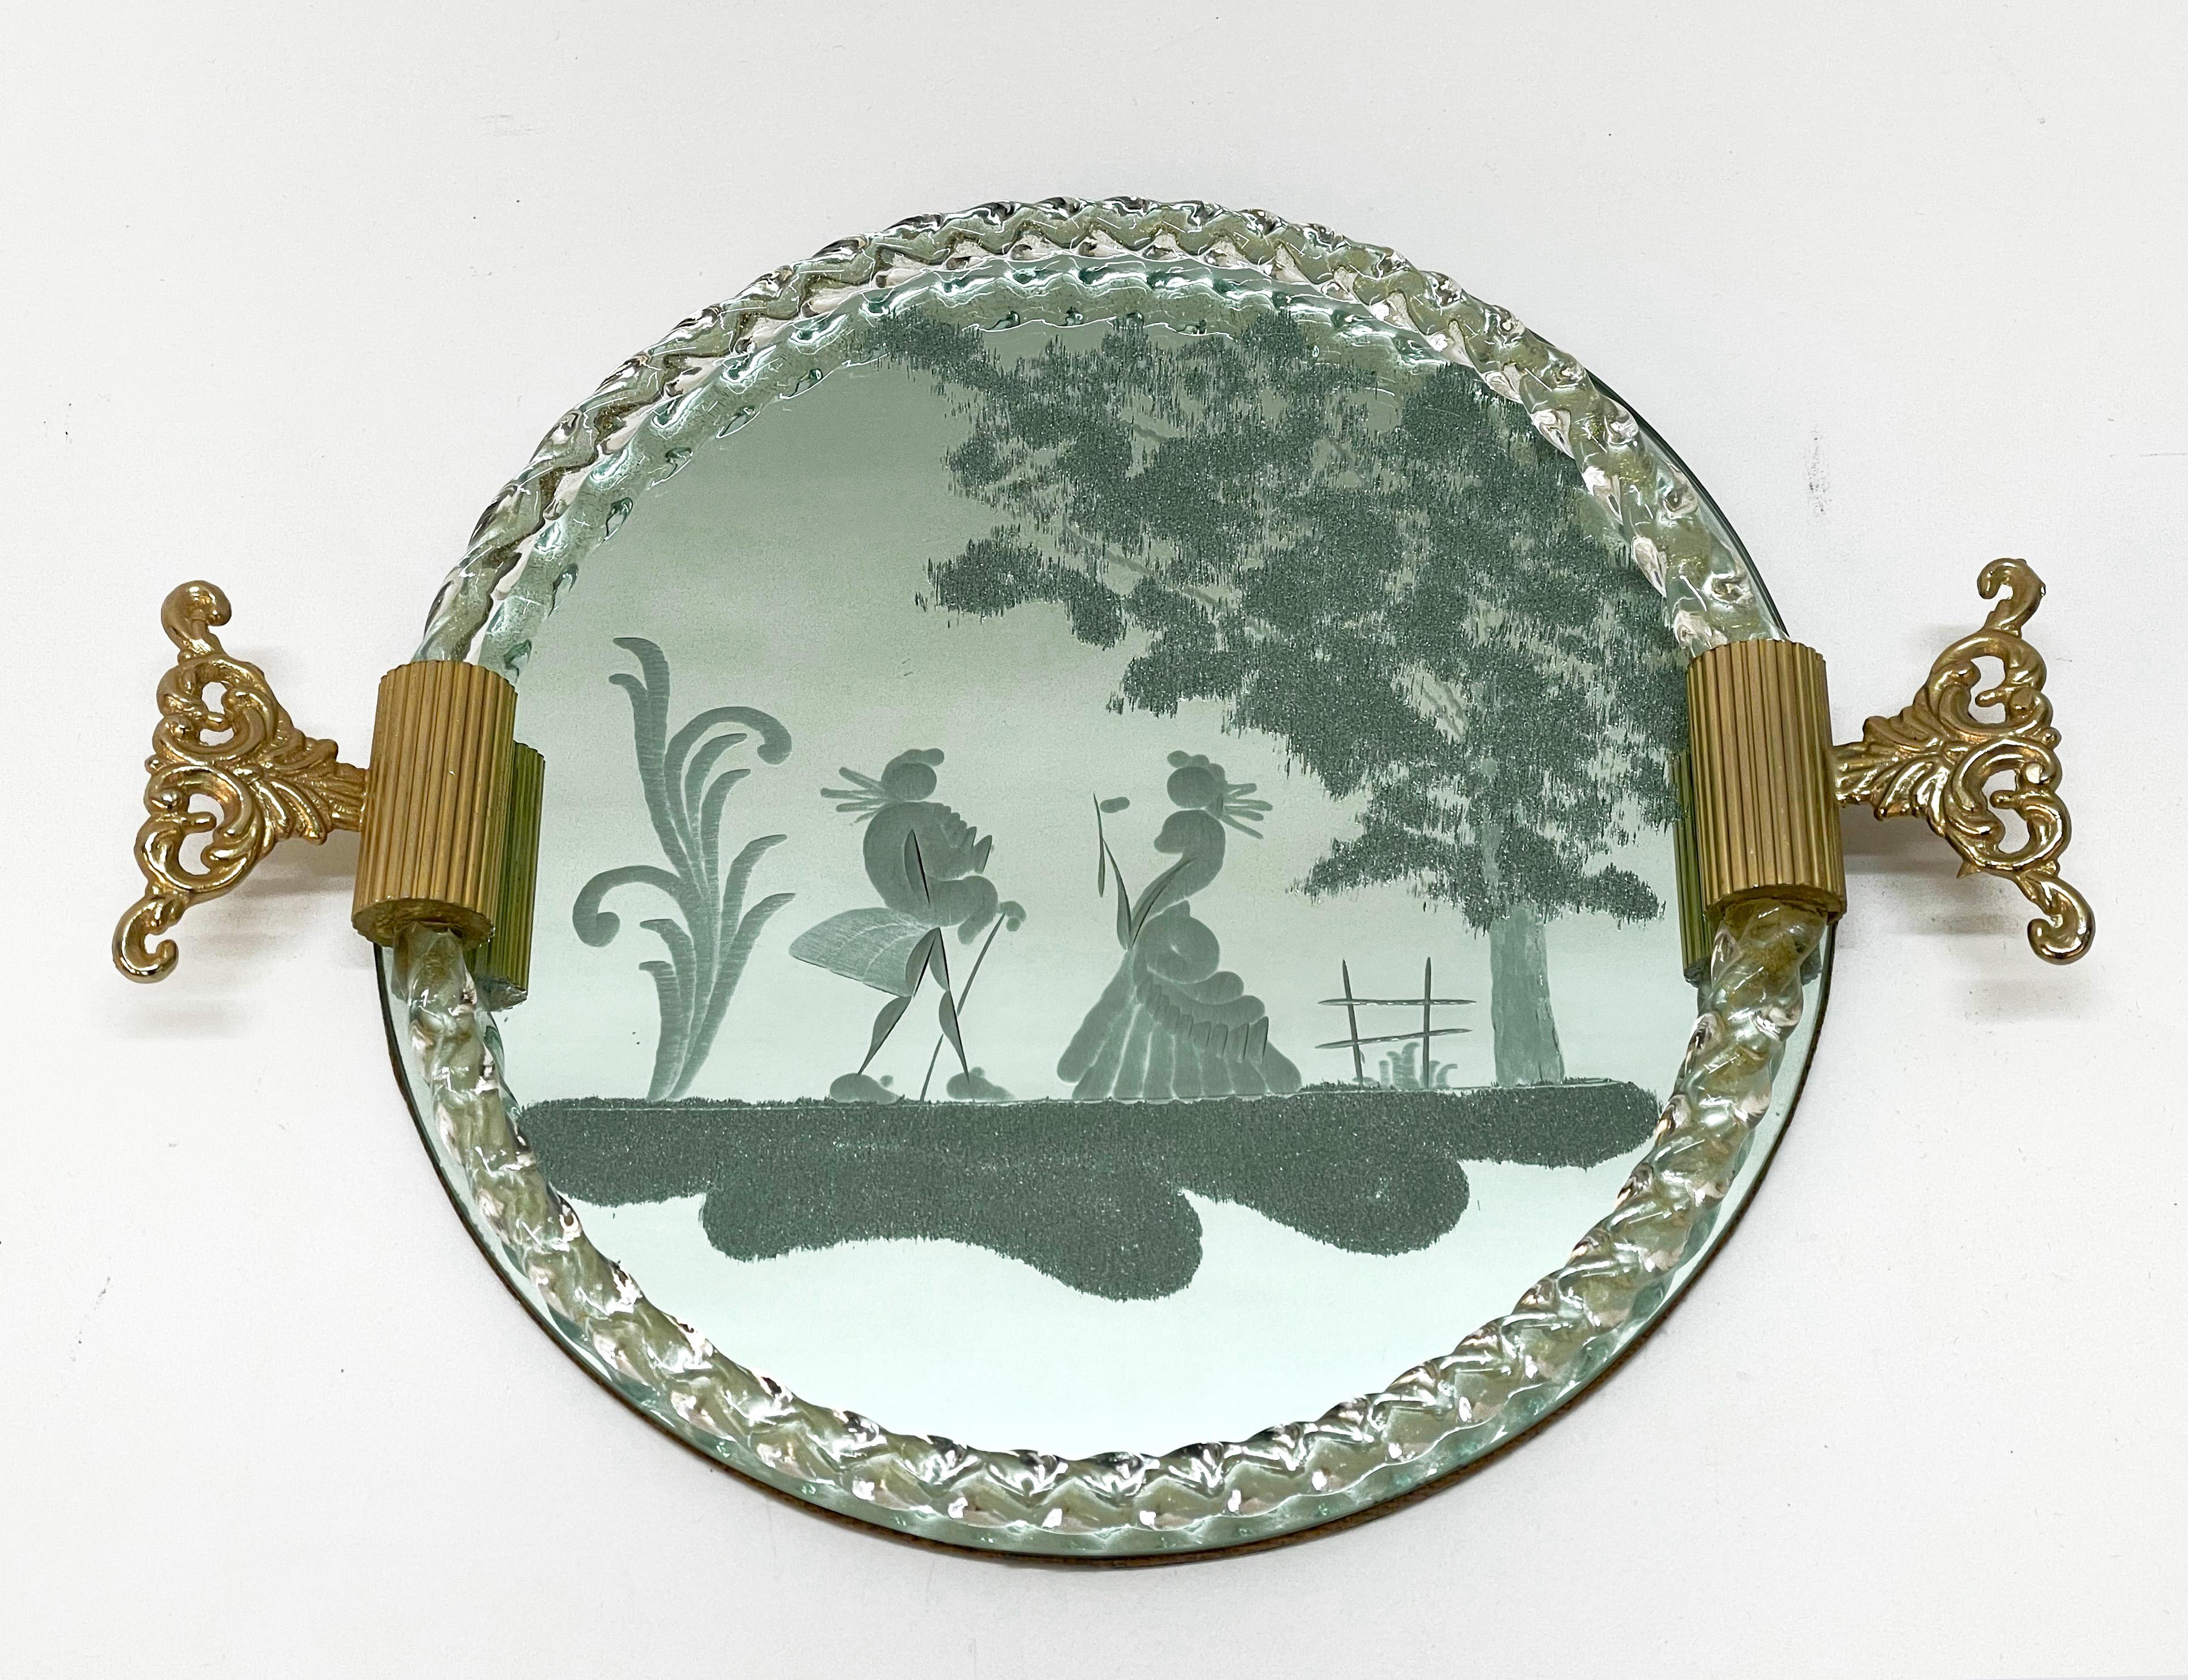 20th Century Ercole Barovier Mirror-Engraved Murano Glass Italian Serving Tray, 1940s For Sale